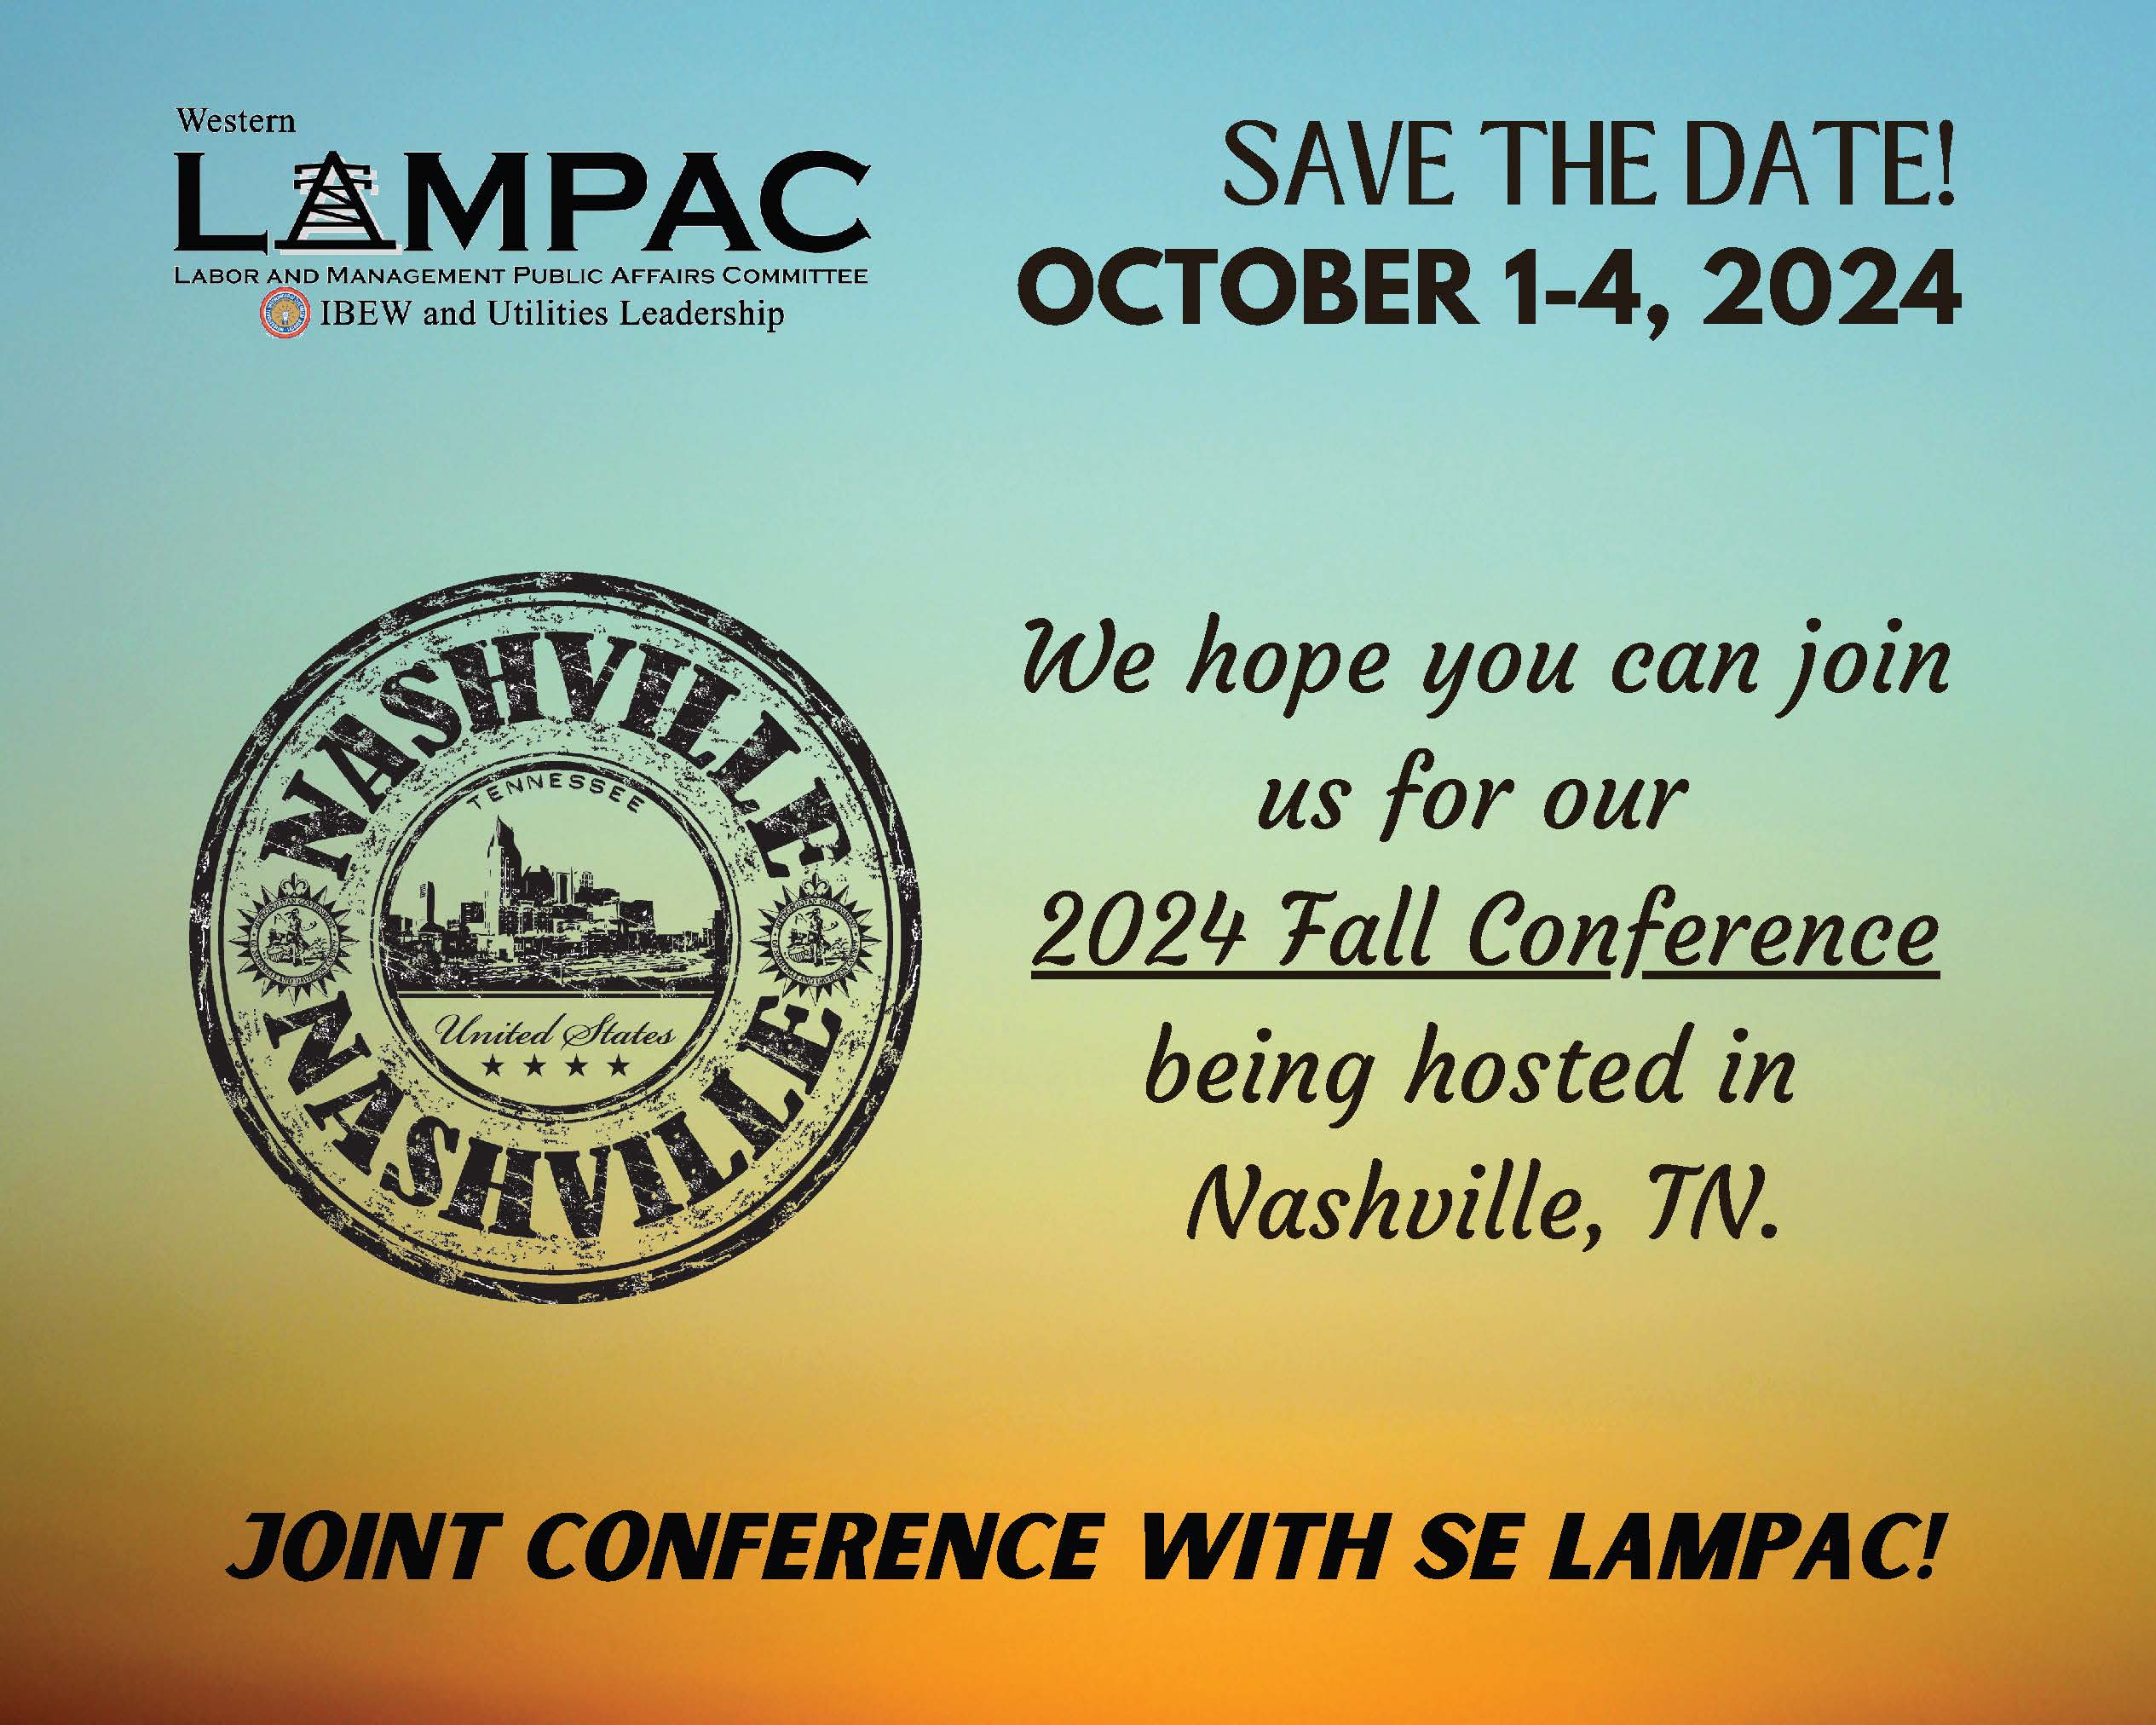 Western LAMPAC 2024 Fall Conference